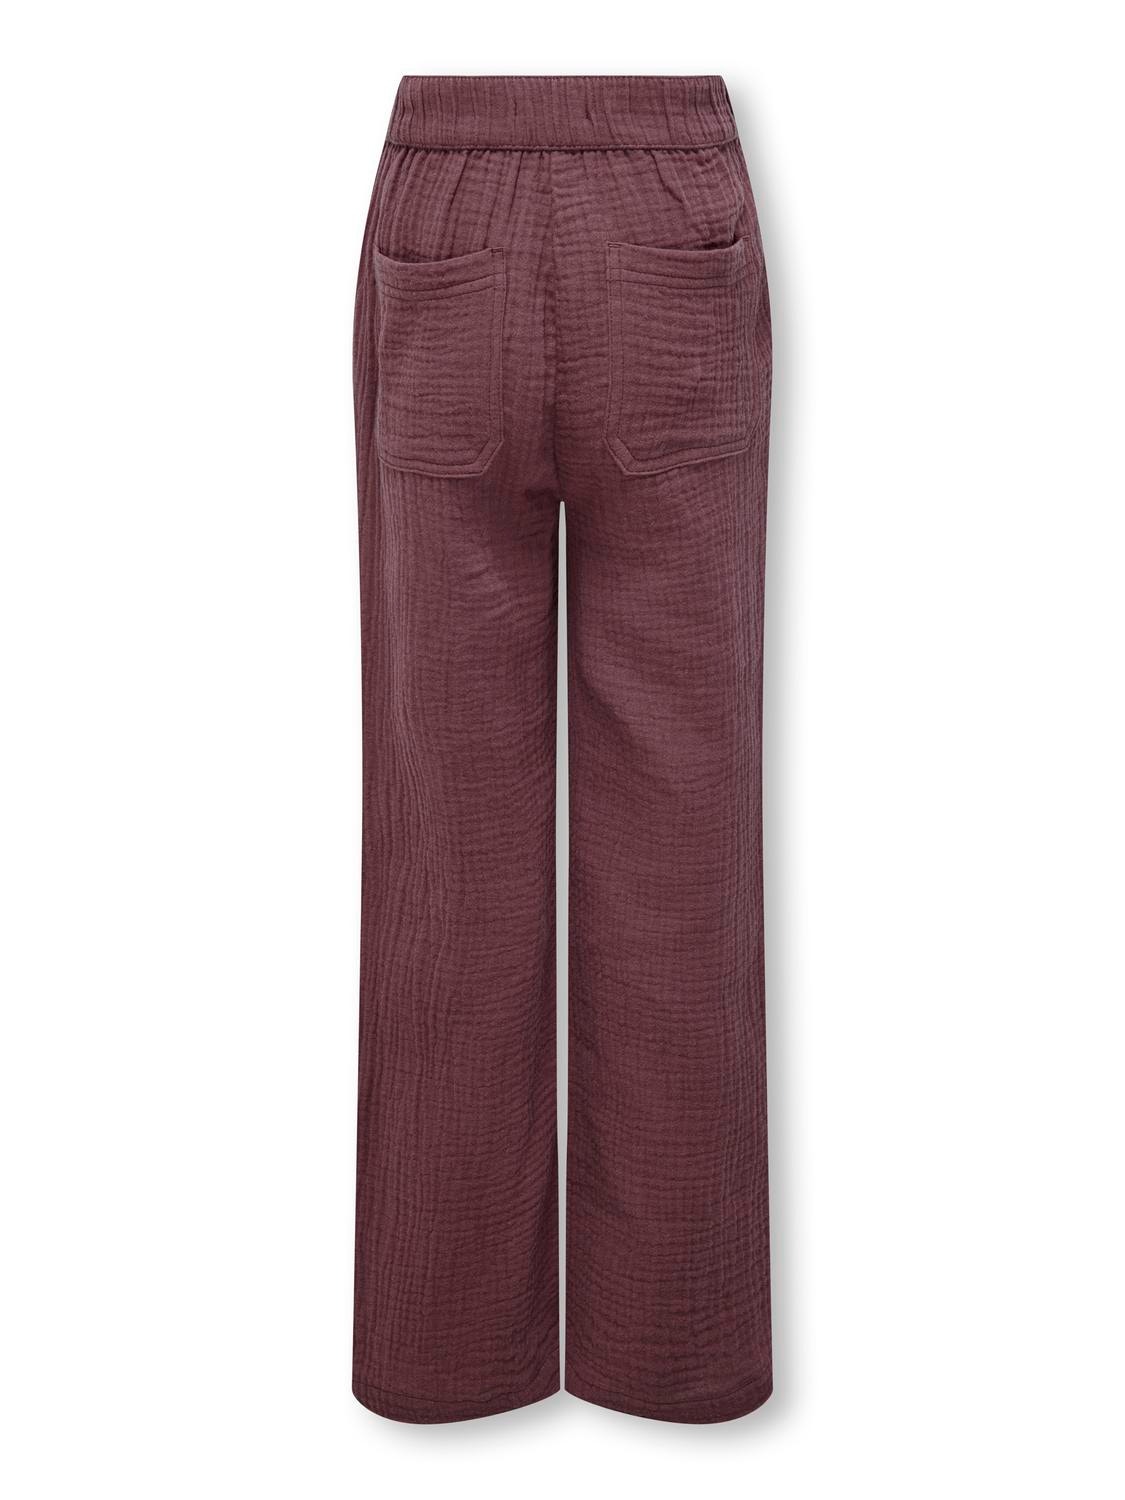 ONLY Regular Fit Trousers -Rose Brown - 15251518